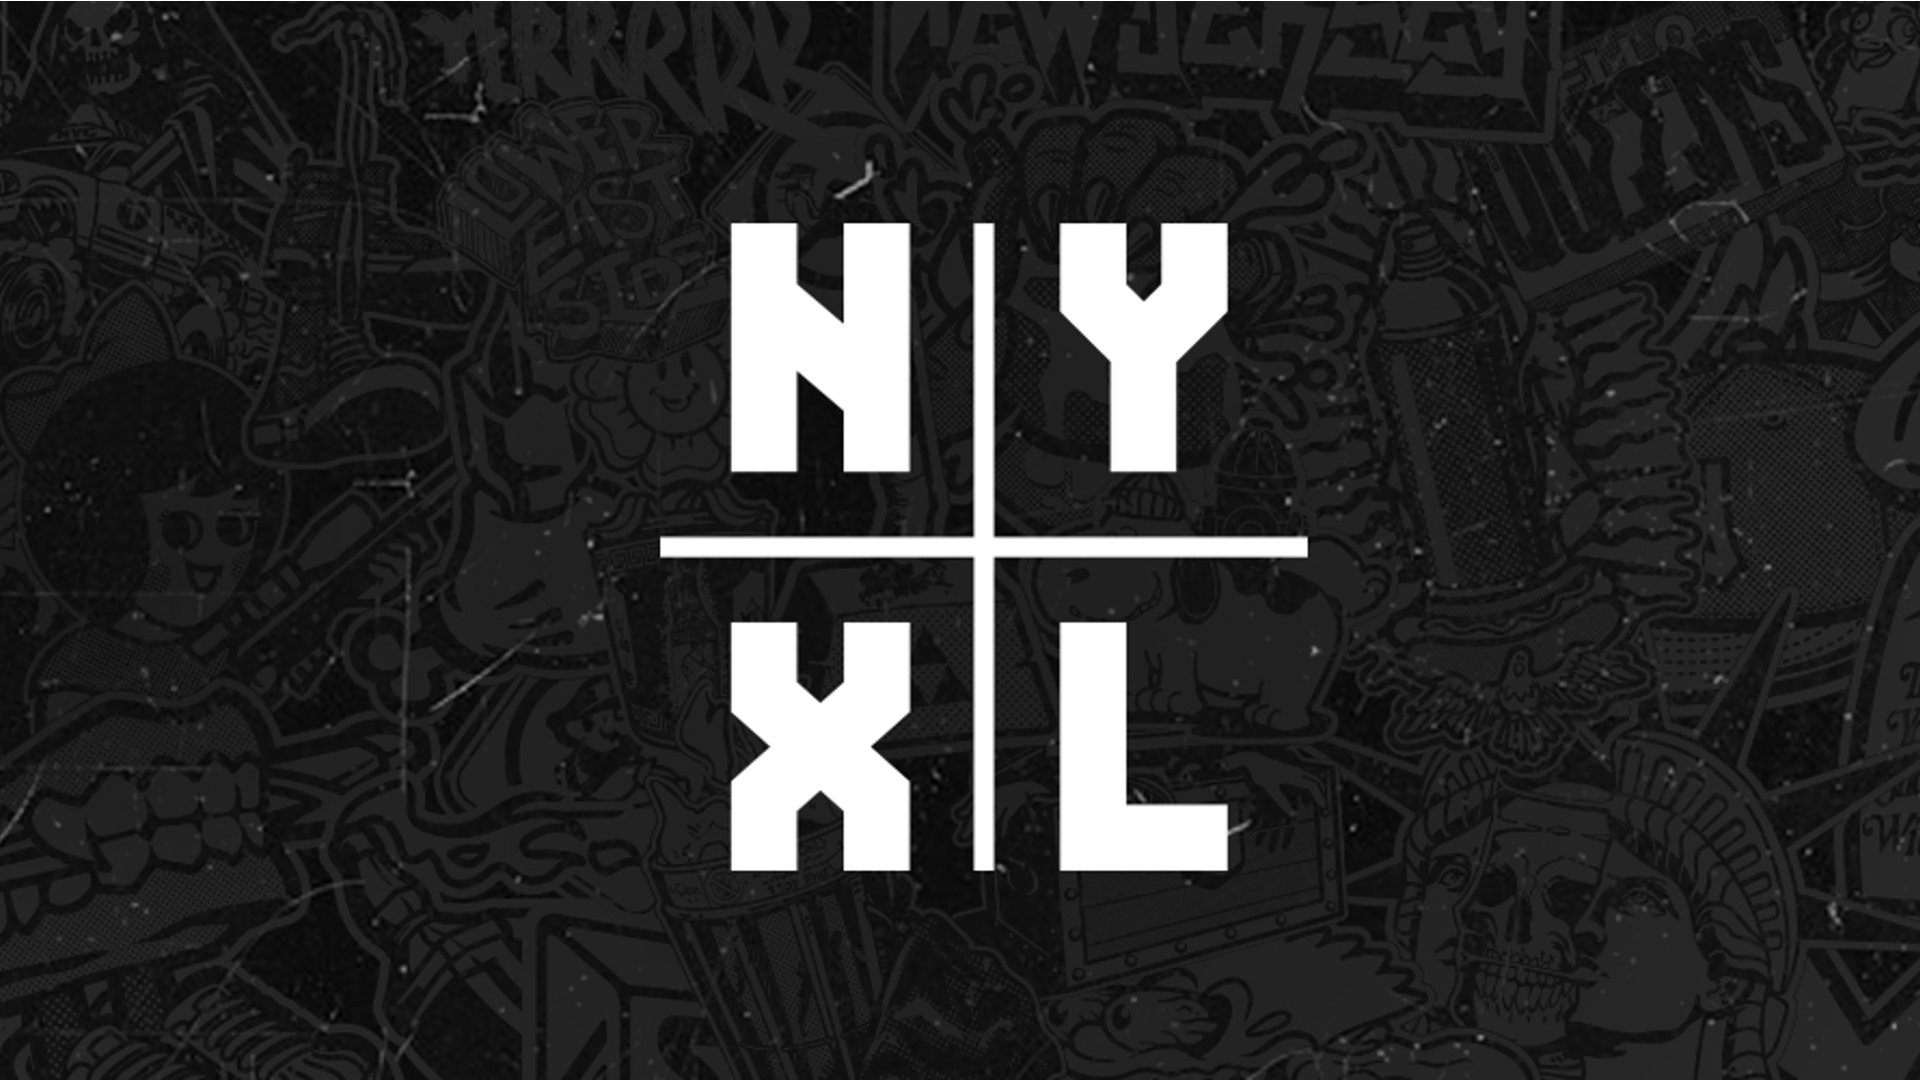 NY Excelsior parts ways with myunb0ng